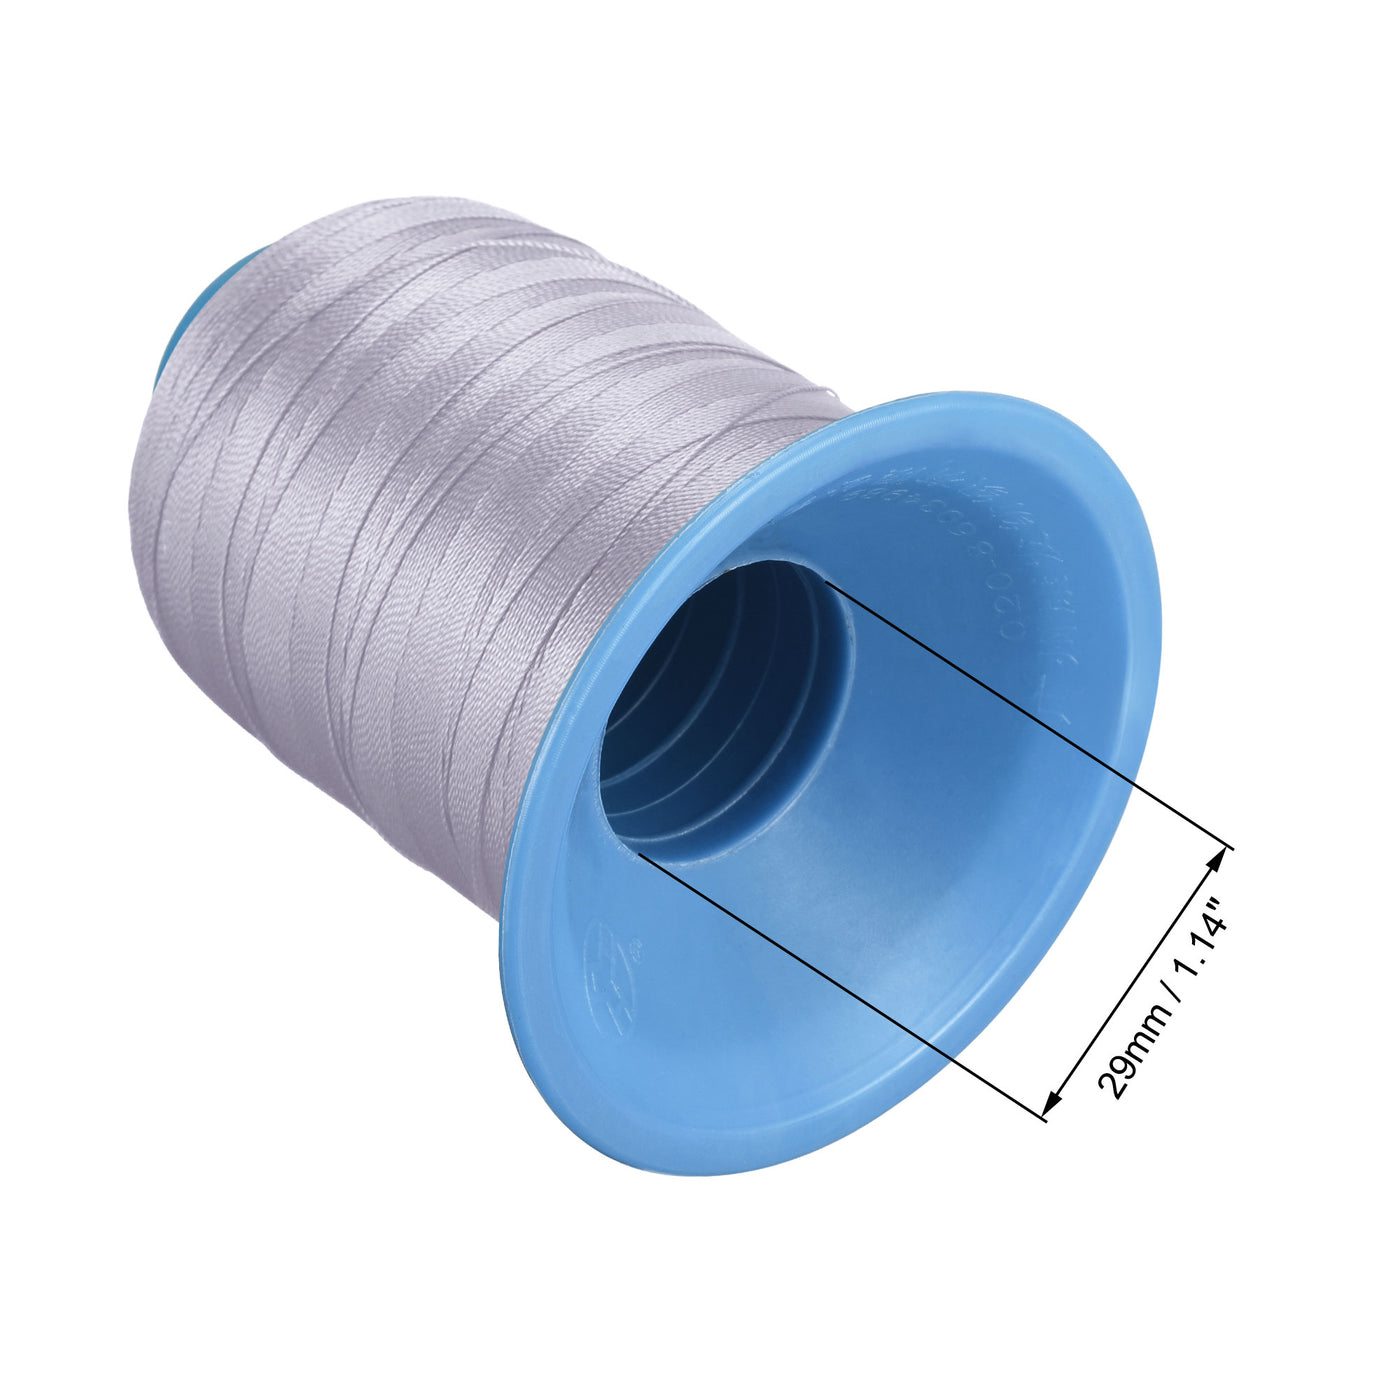 Uxcell Uxcell Bonded Polyester Thread Extra-strong 610 Yards 420D/0.45mm (Steel Blue)